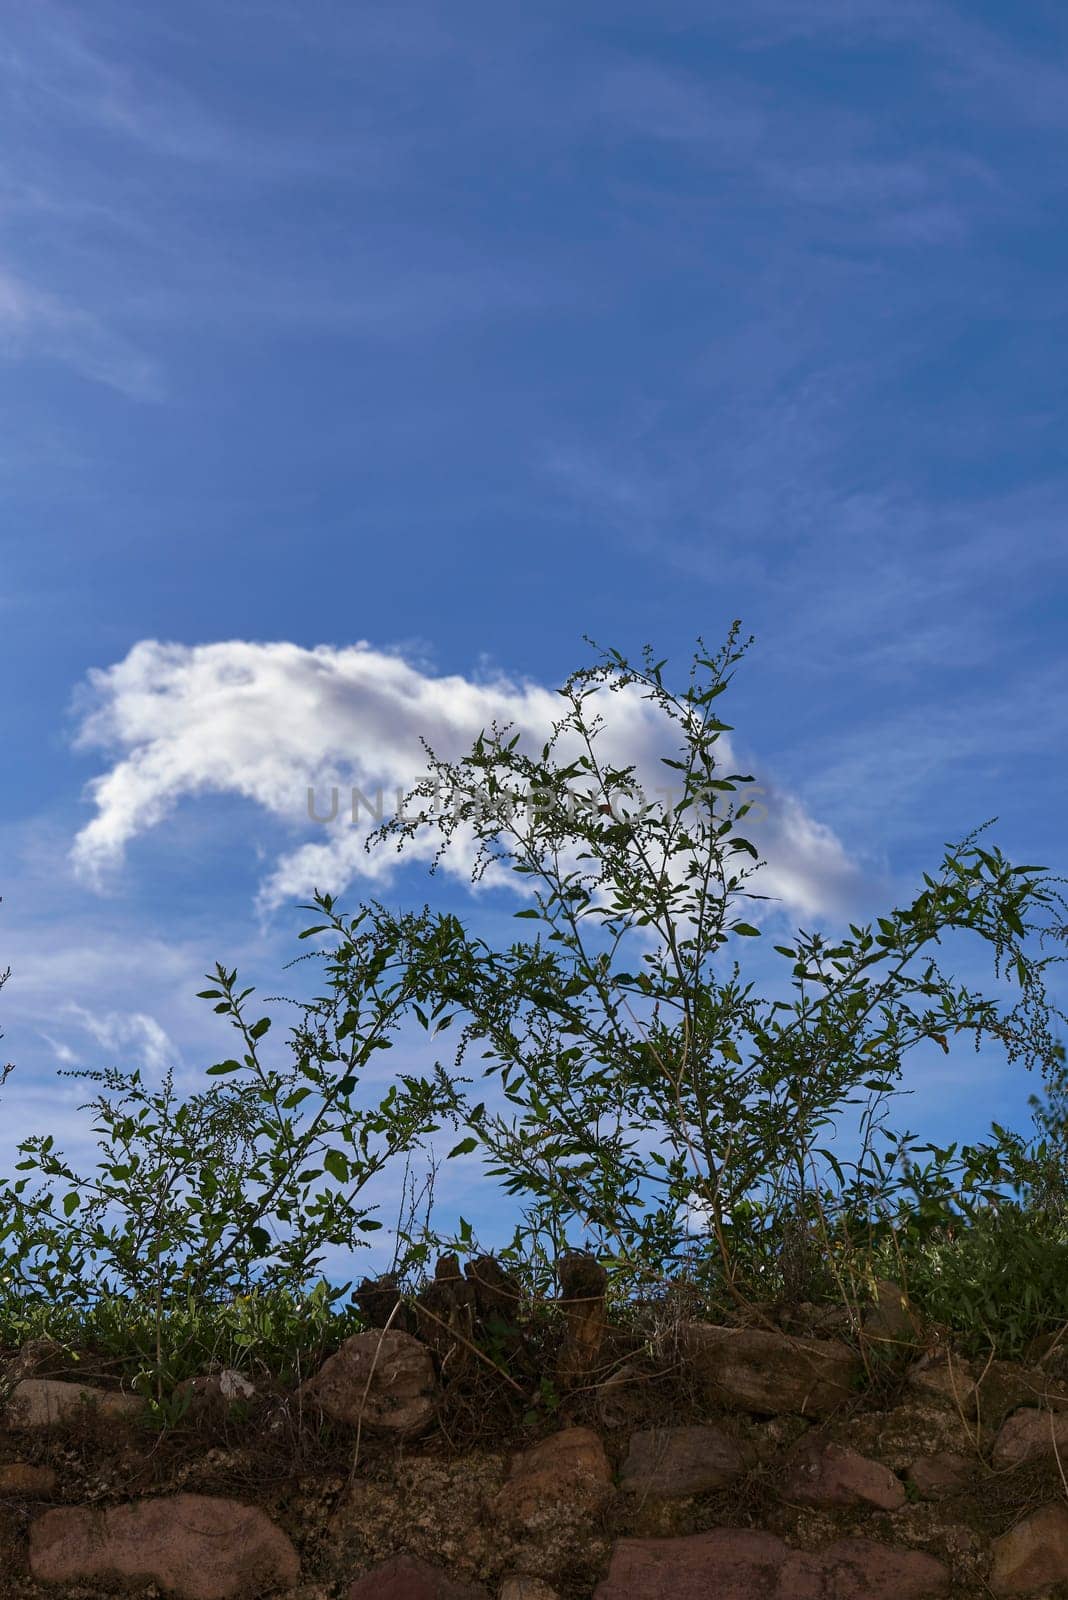 A cloud over plants in the blue sky by raul_ruiz